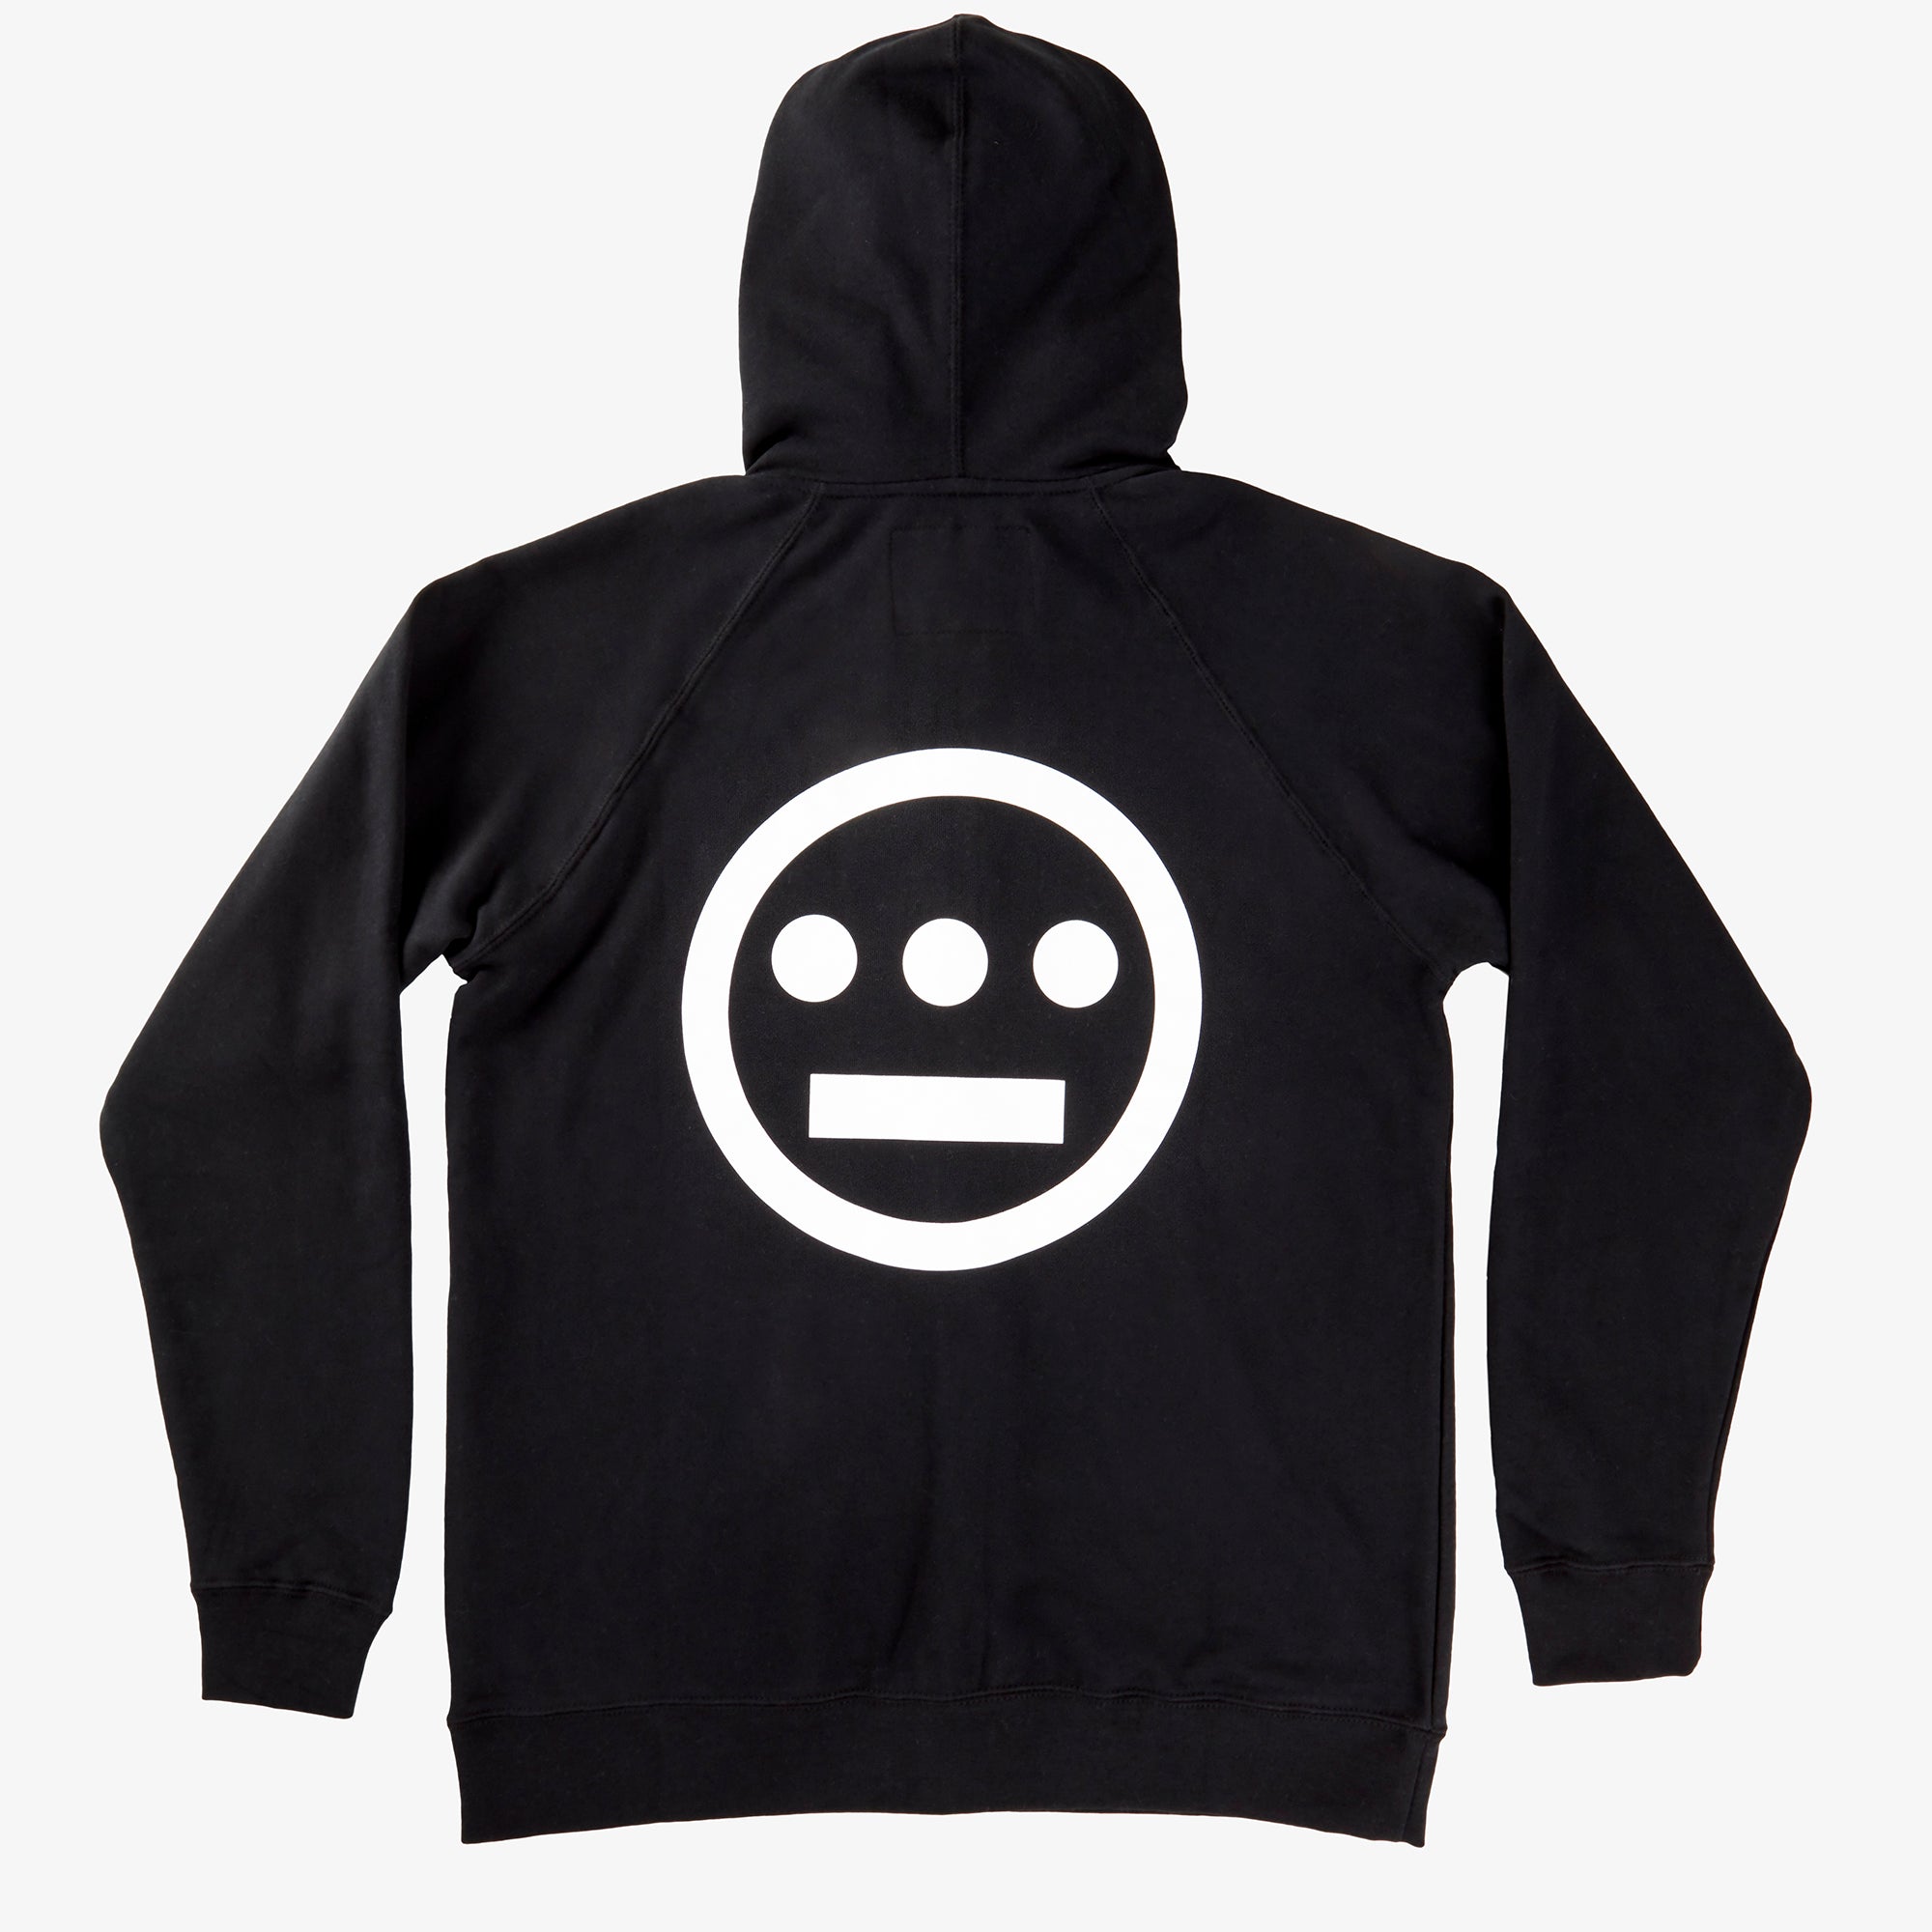 Large white Hieroglyphics hip hop logo on the back of a black zip-up hoodie.